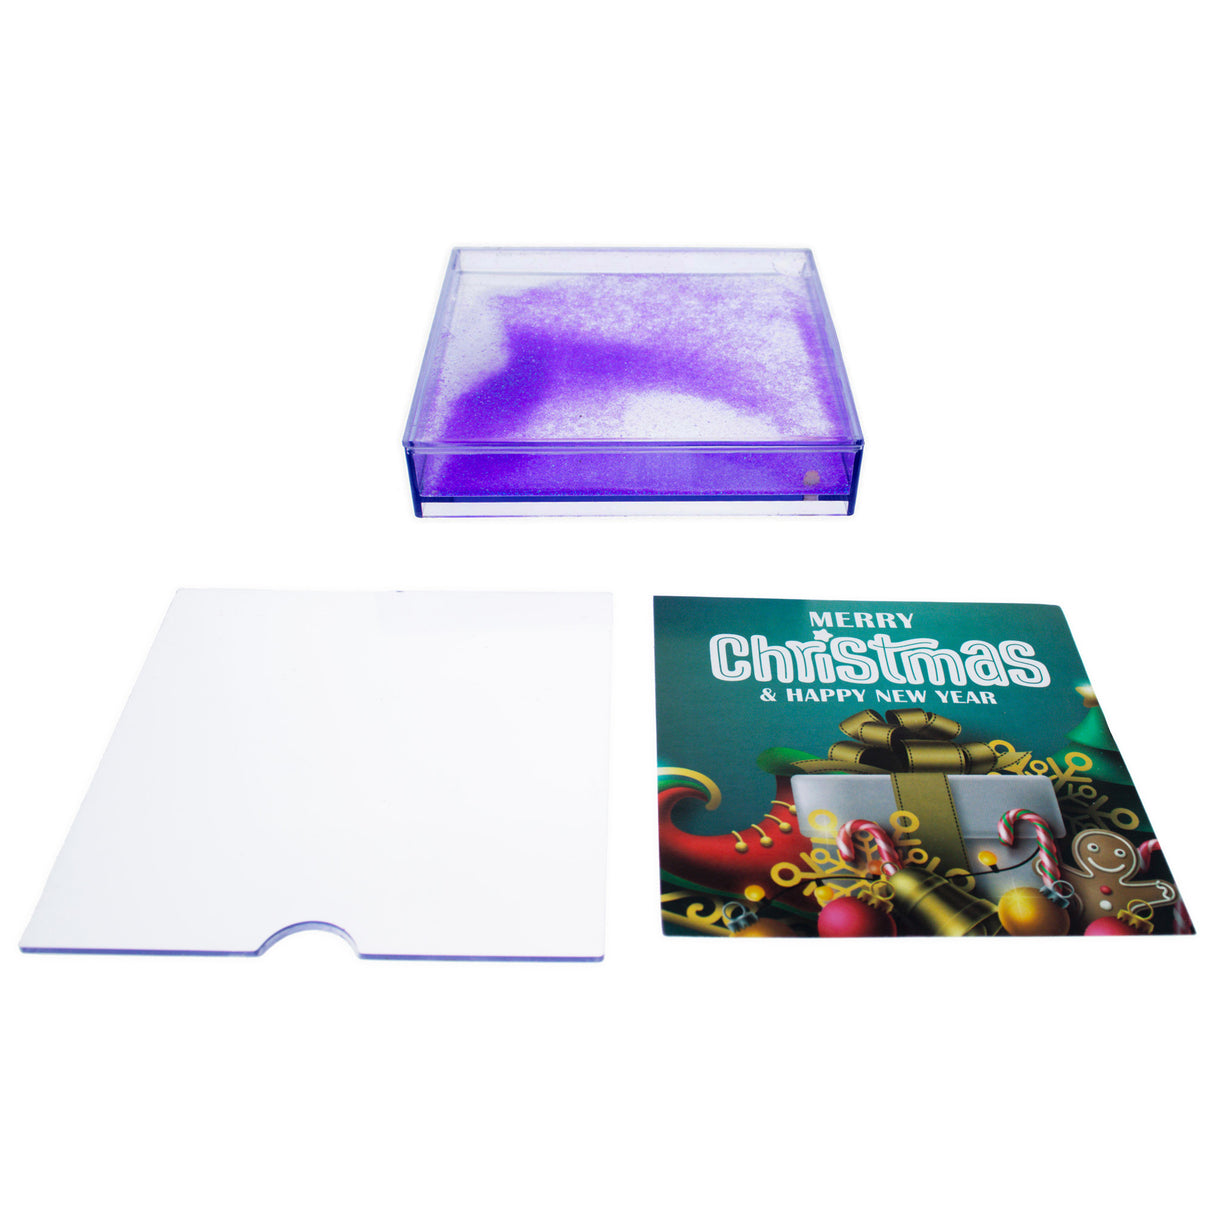 Sparkling Square: Clear Plastic Glitter Water Picture Frame ,dimensions in inches: 4.35 x 0.9 x 4.35